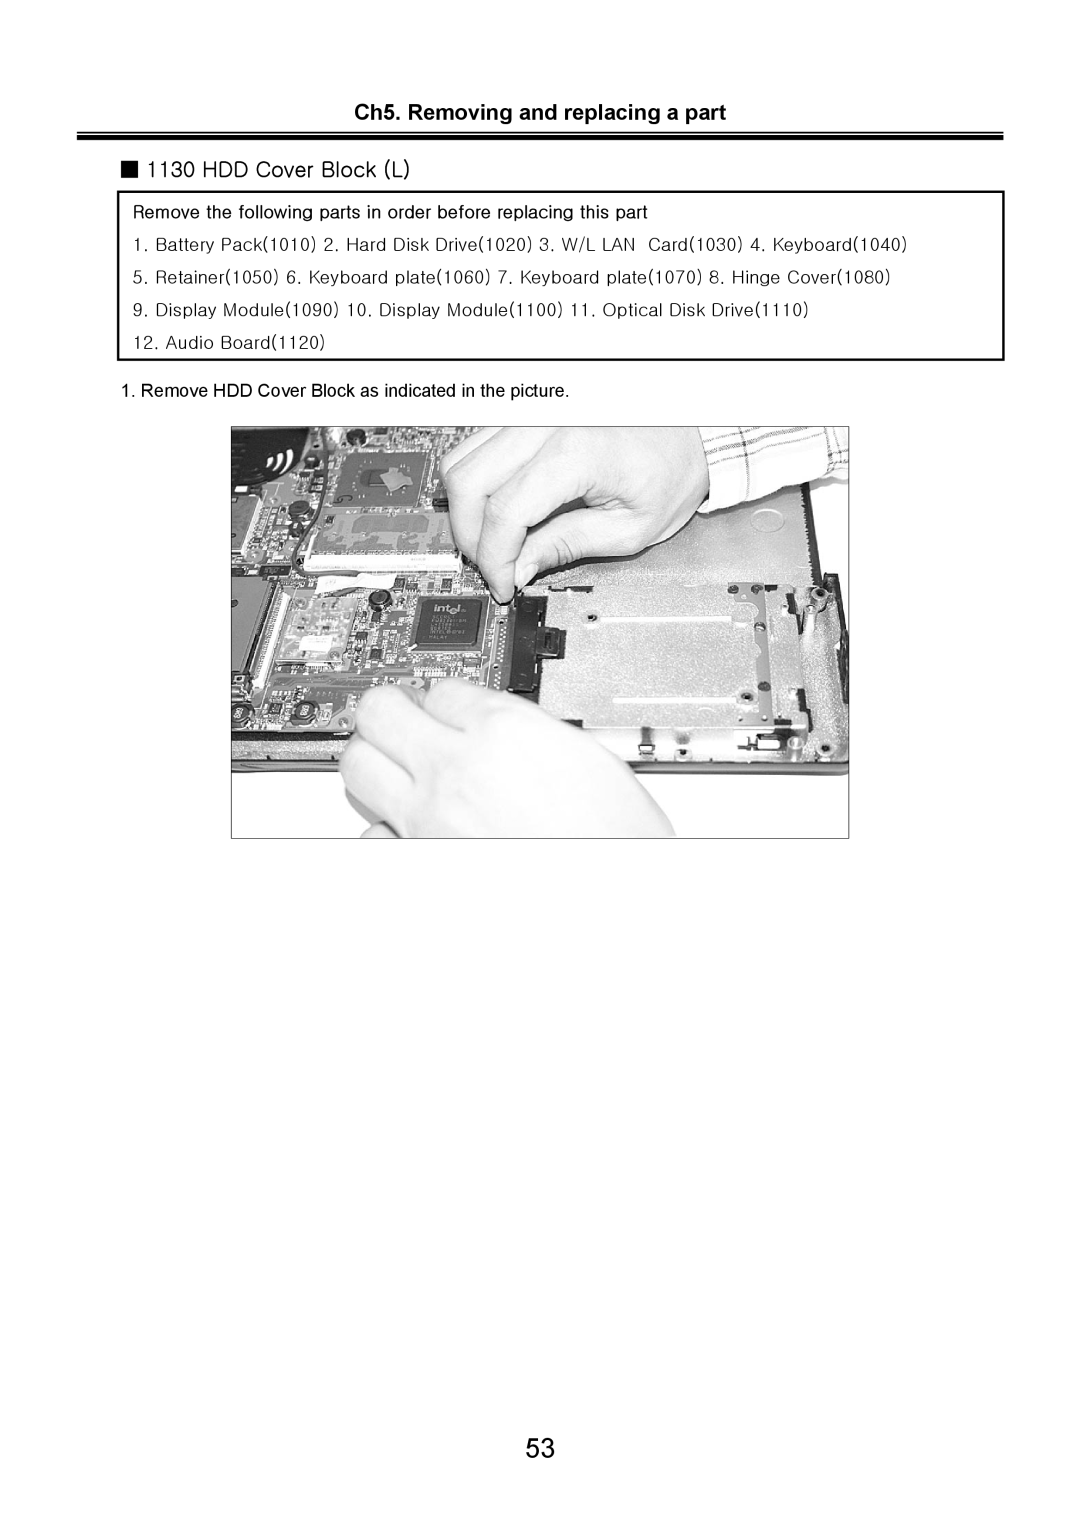 LG Electronics LS70 service manual Ch5. Removing and replacing a part 1130 HDD Cover Block L 